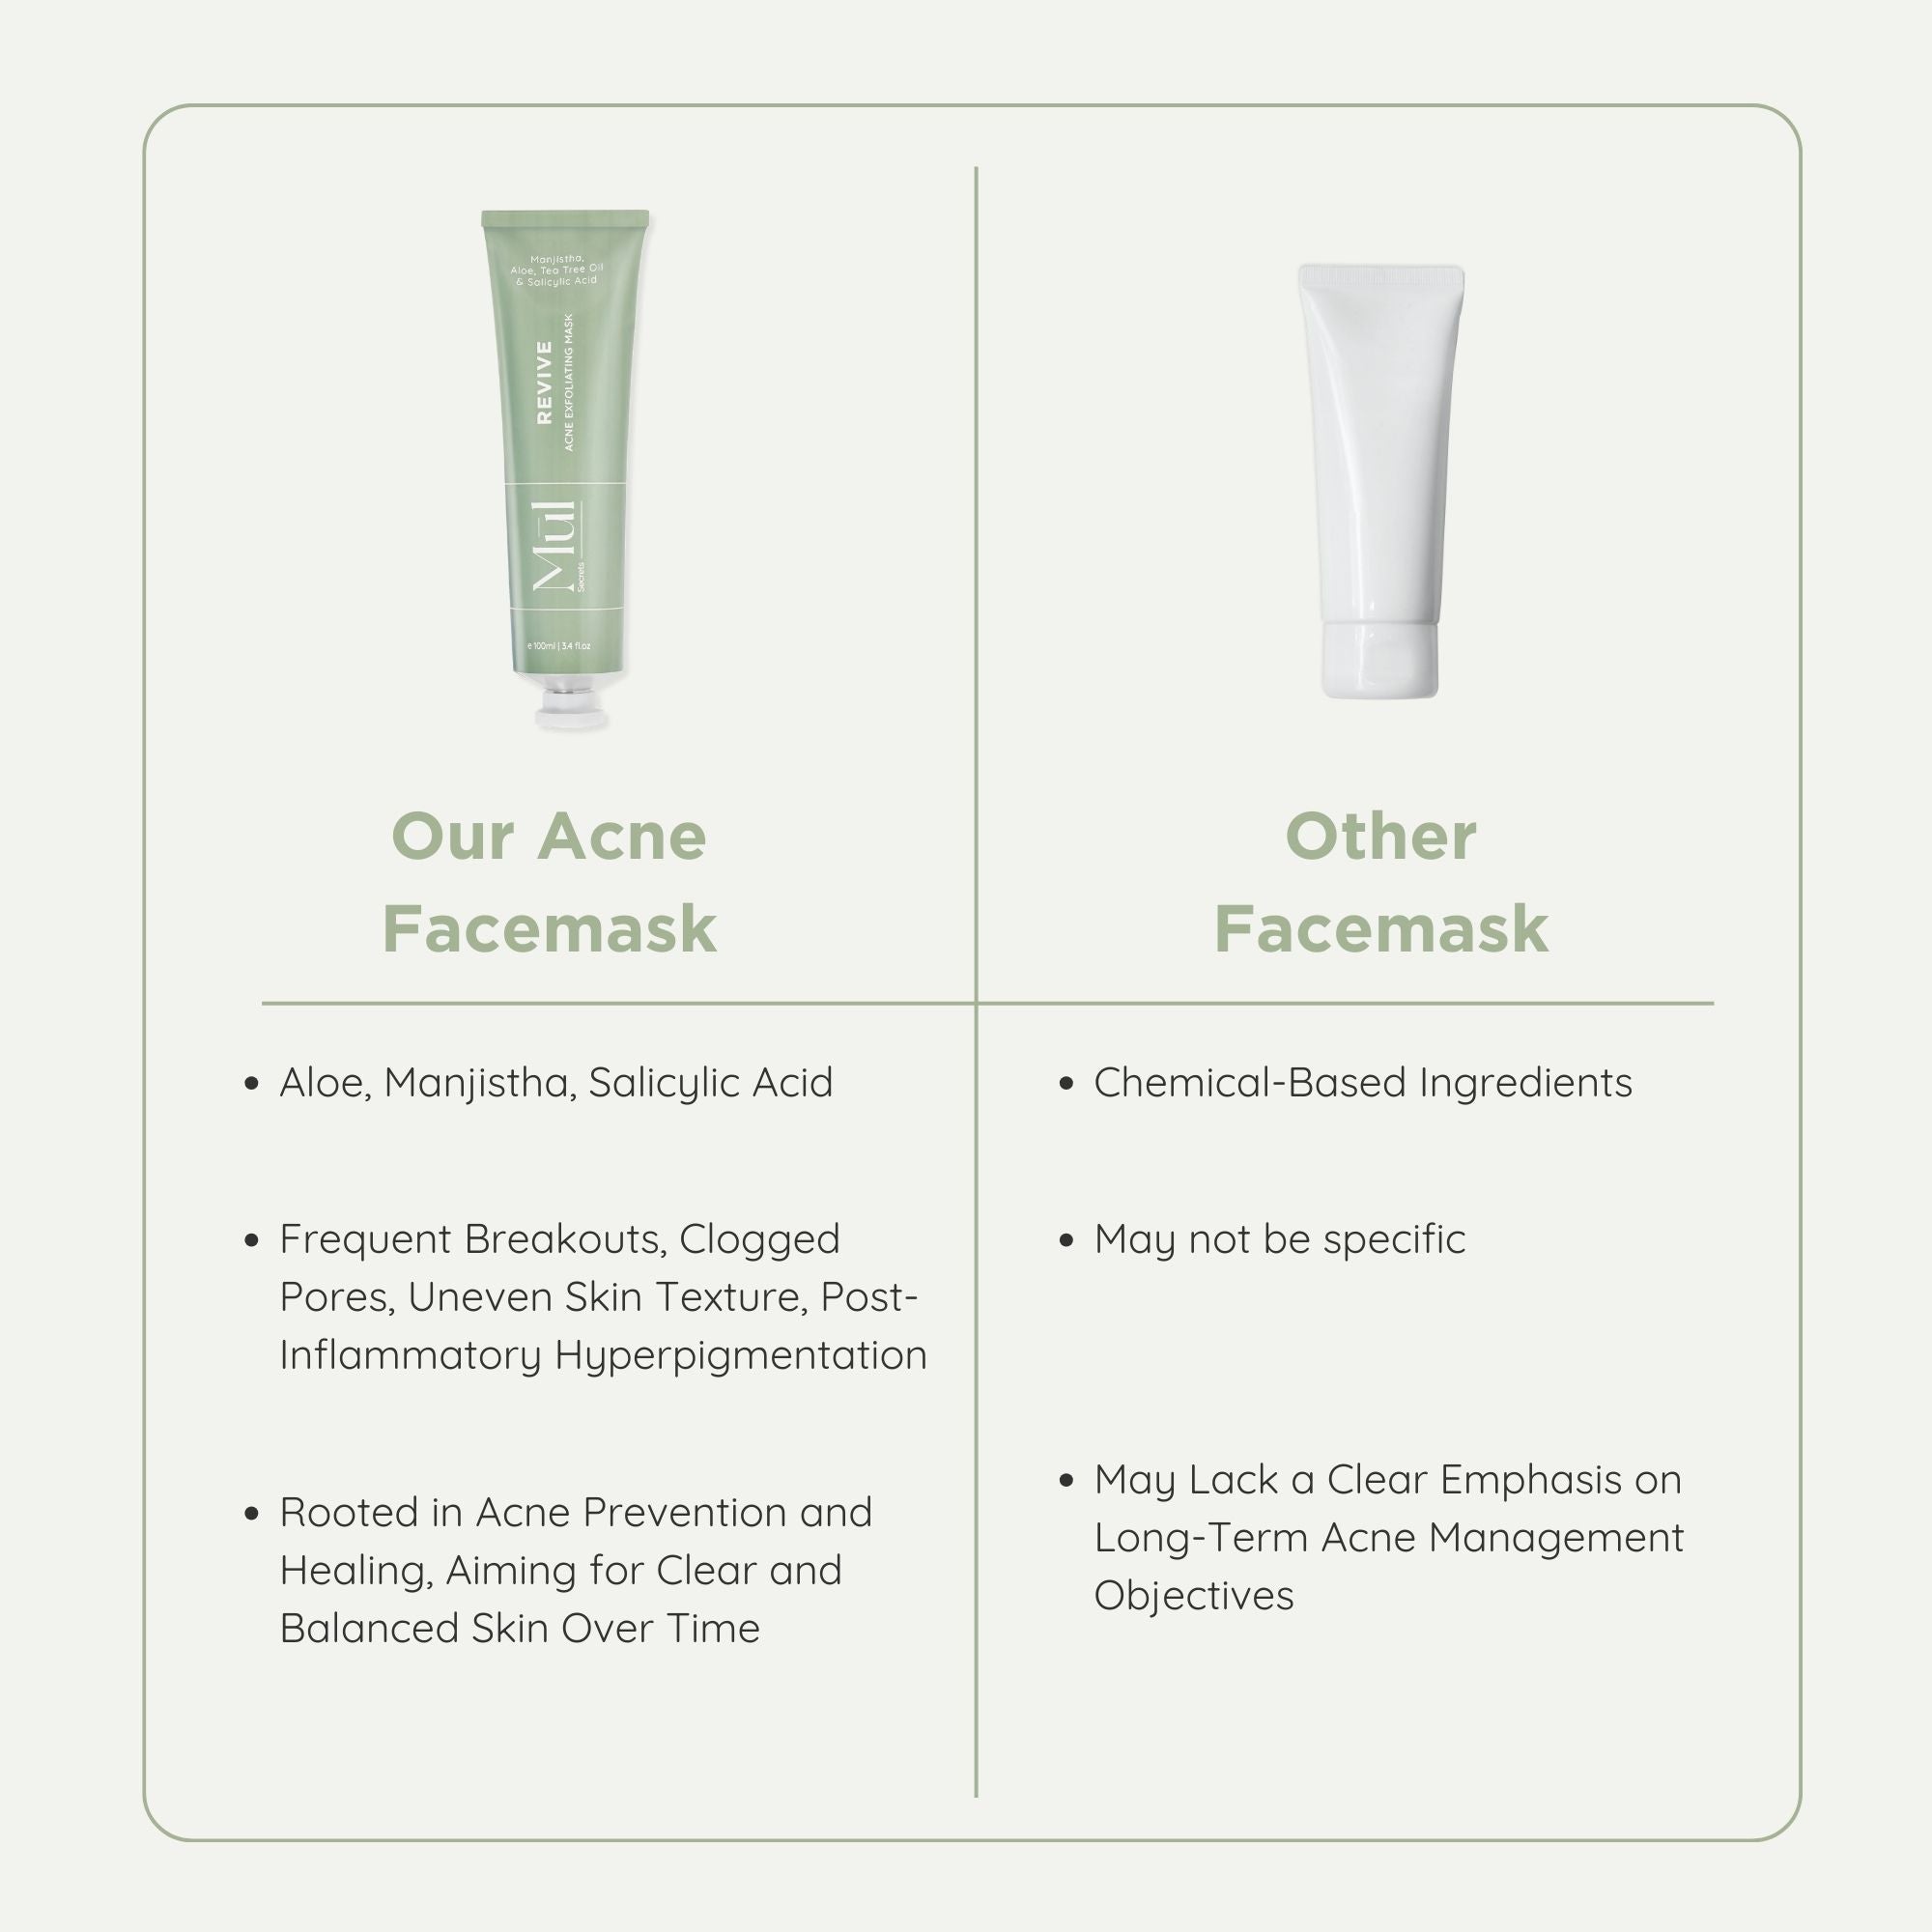 comparison of revive acne facemasks vs the usual masks available in the market